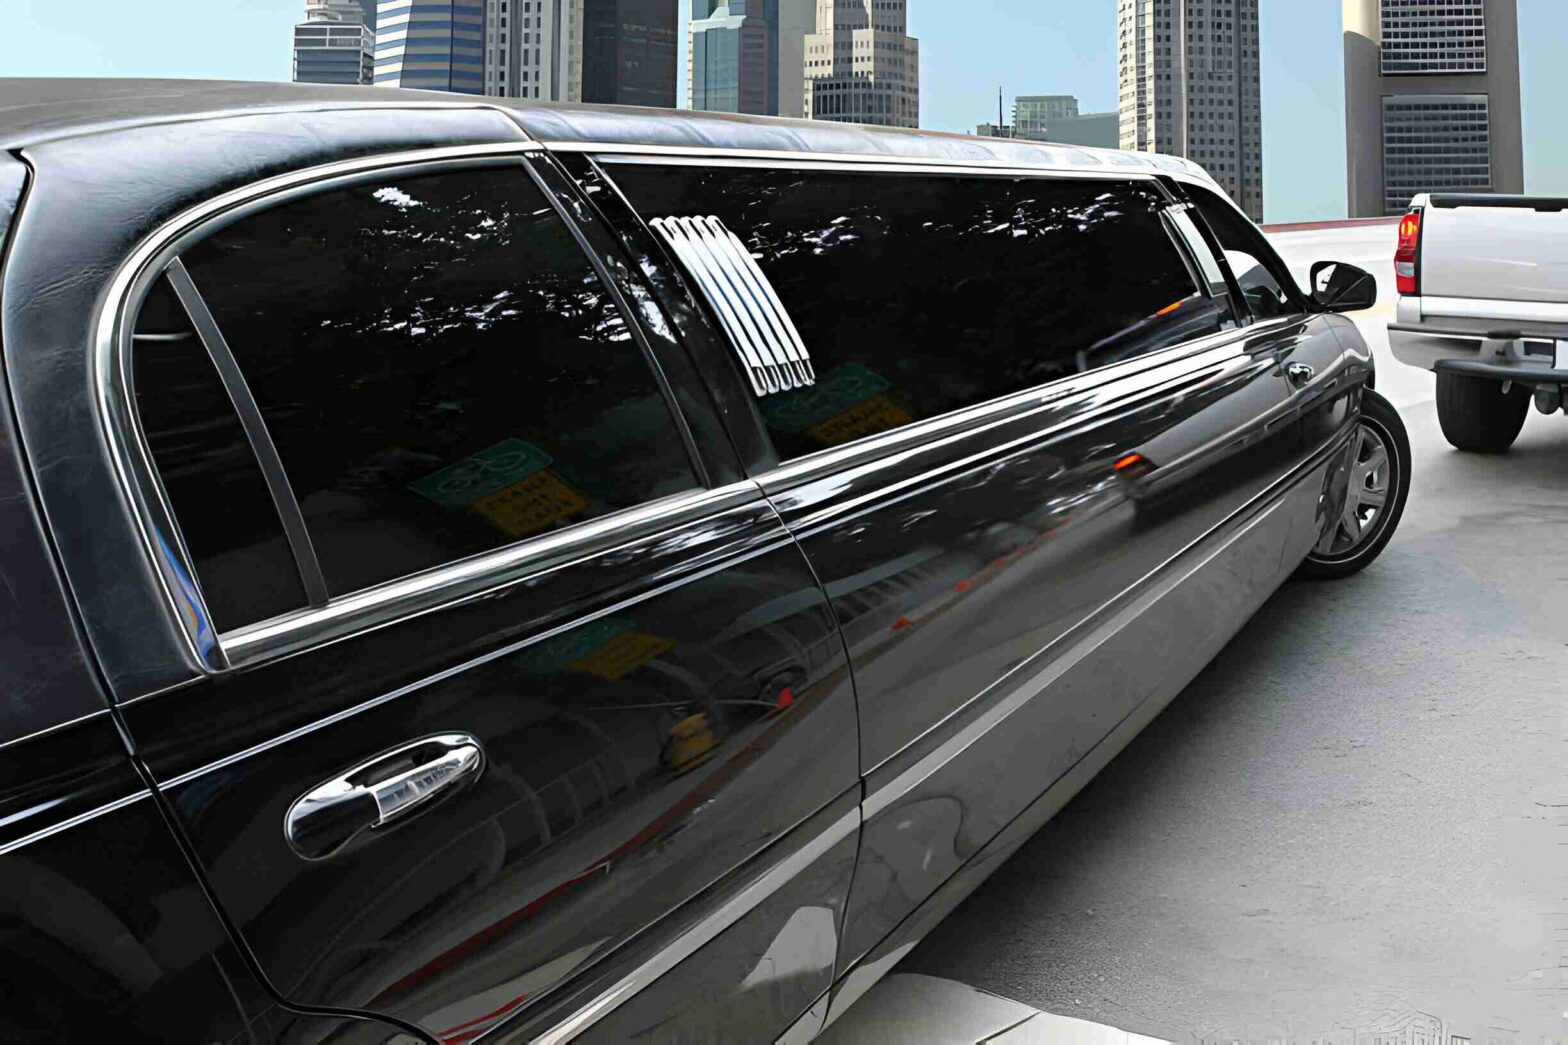 Ride in Elegance: Exploring Limo Services in Chicago